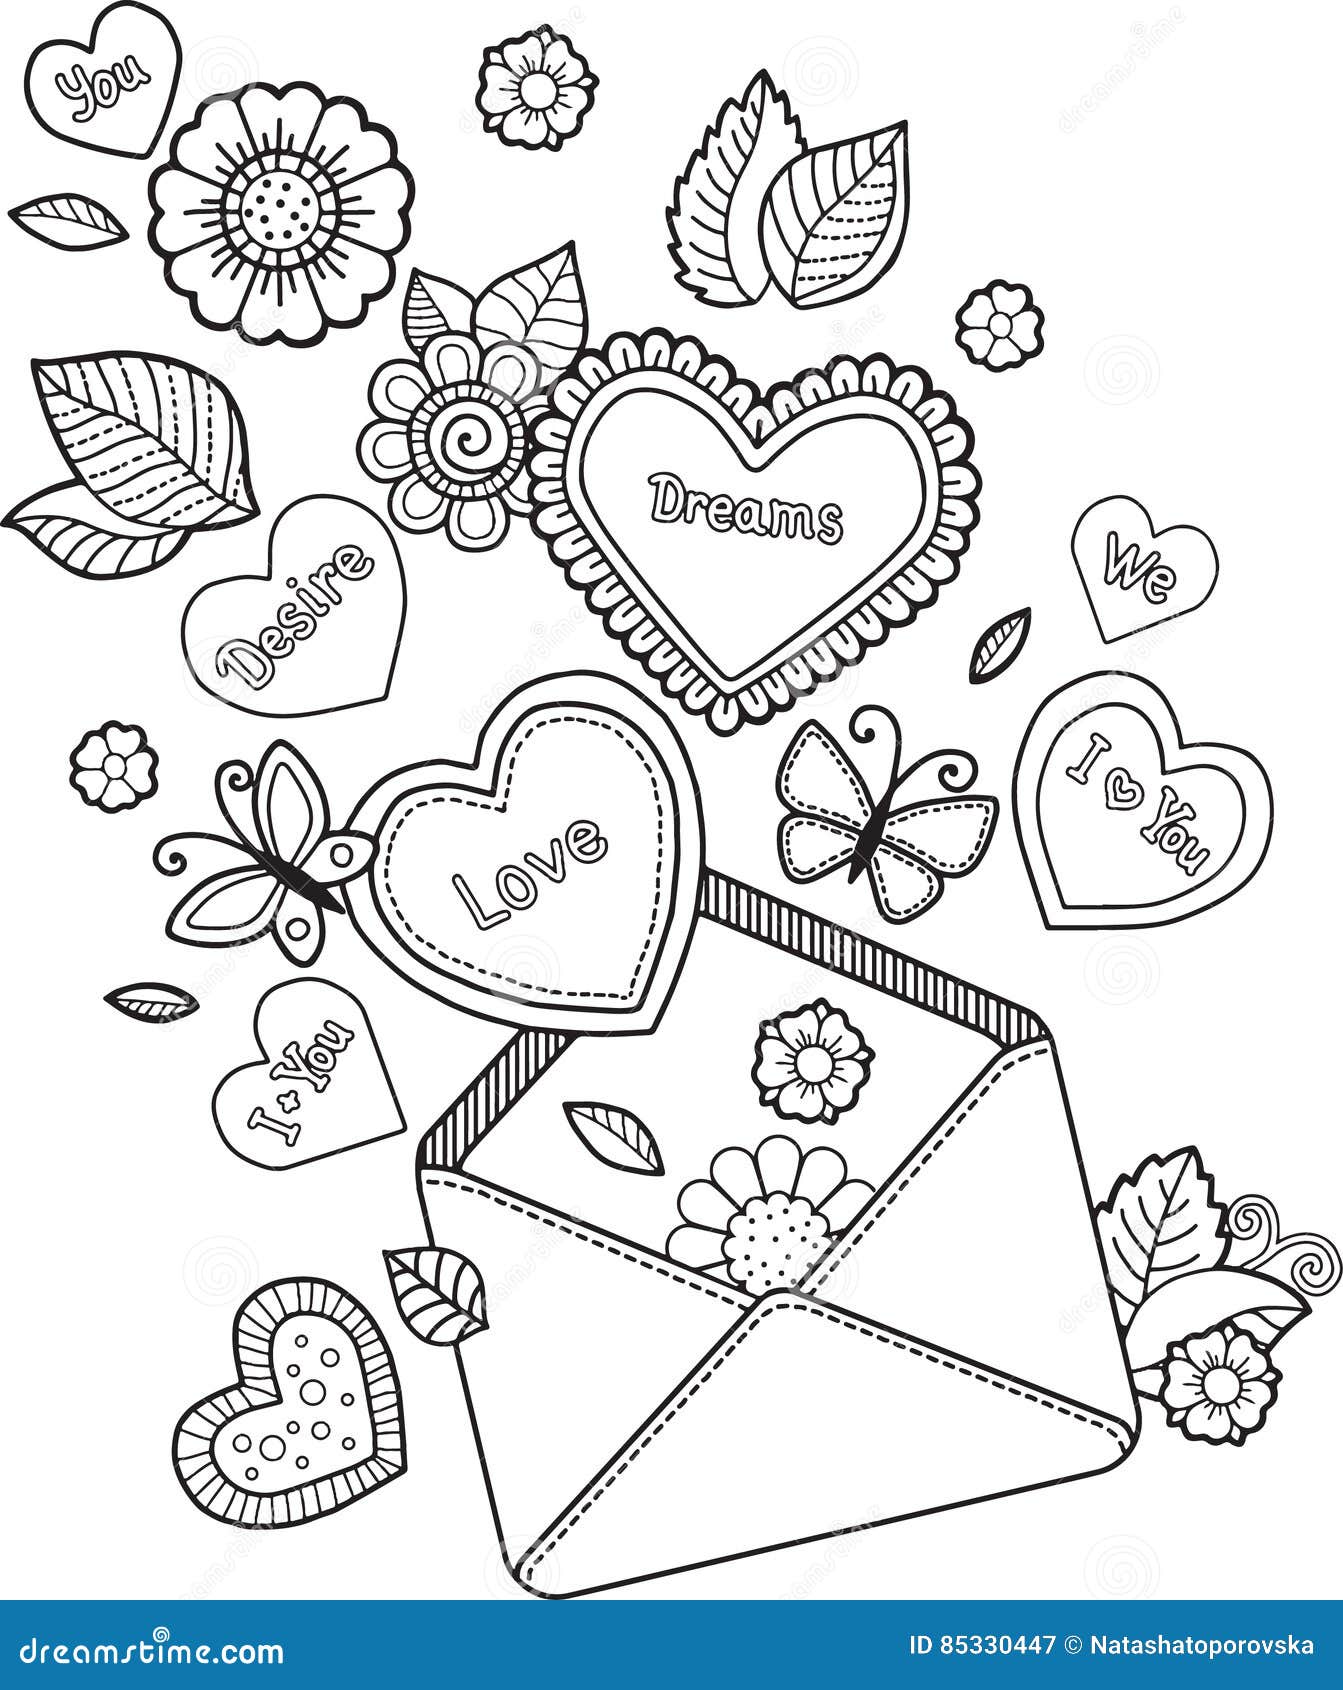 Adult Coloring Book Stock Illustrations – 68,554 Adult Coloring Book Stock  Illustrations, Vectors & Clipart - Dreamstime